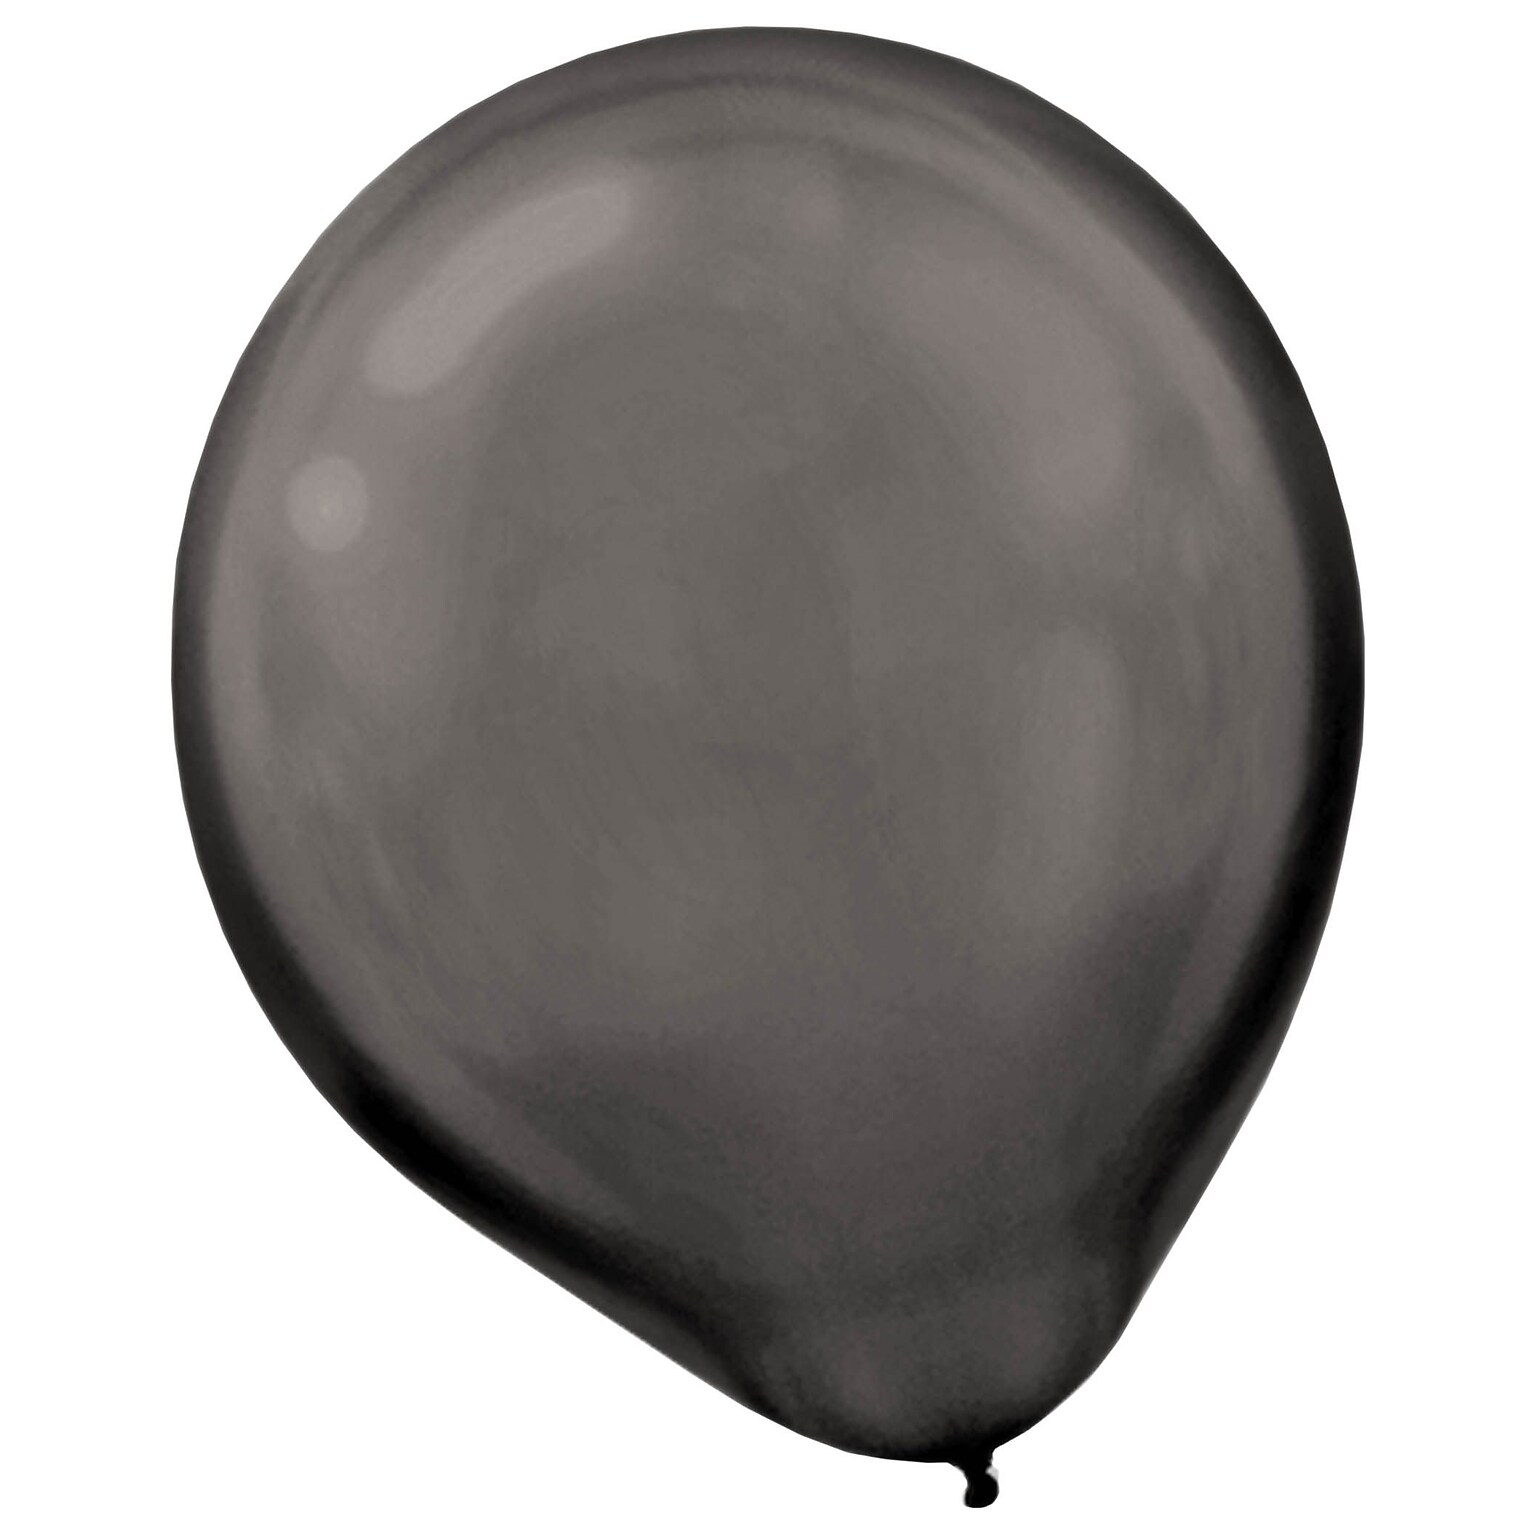 Amscan Pearlized Latex Balloons Packaged, 12, 16/Pack, Black, 15 Per Pack (113253.1)